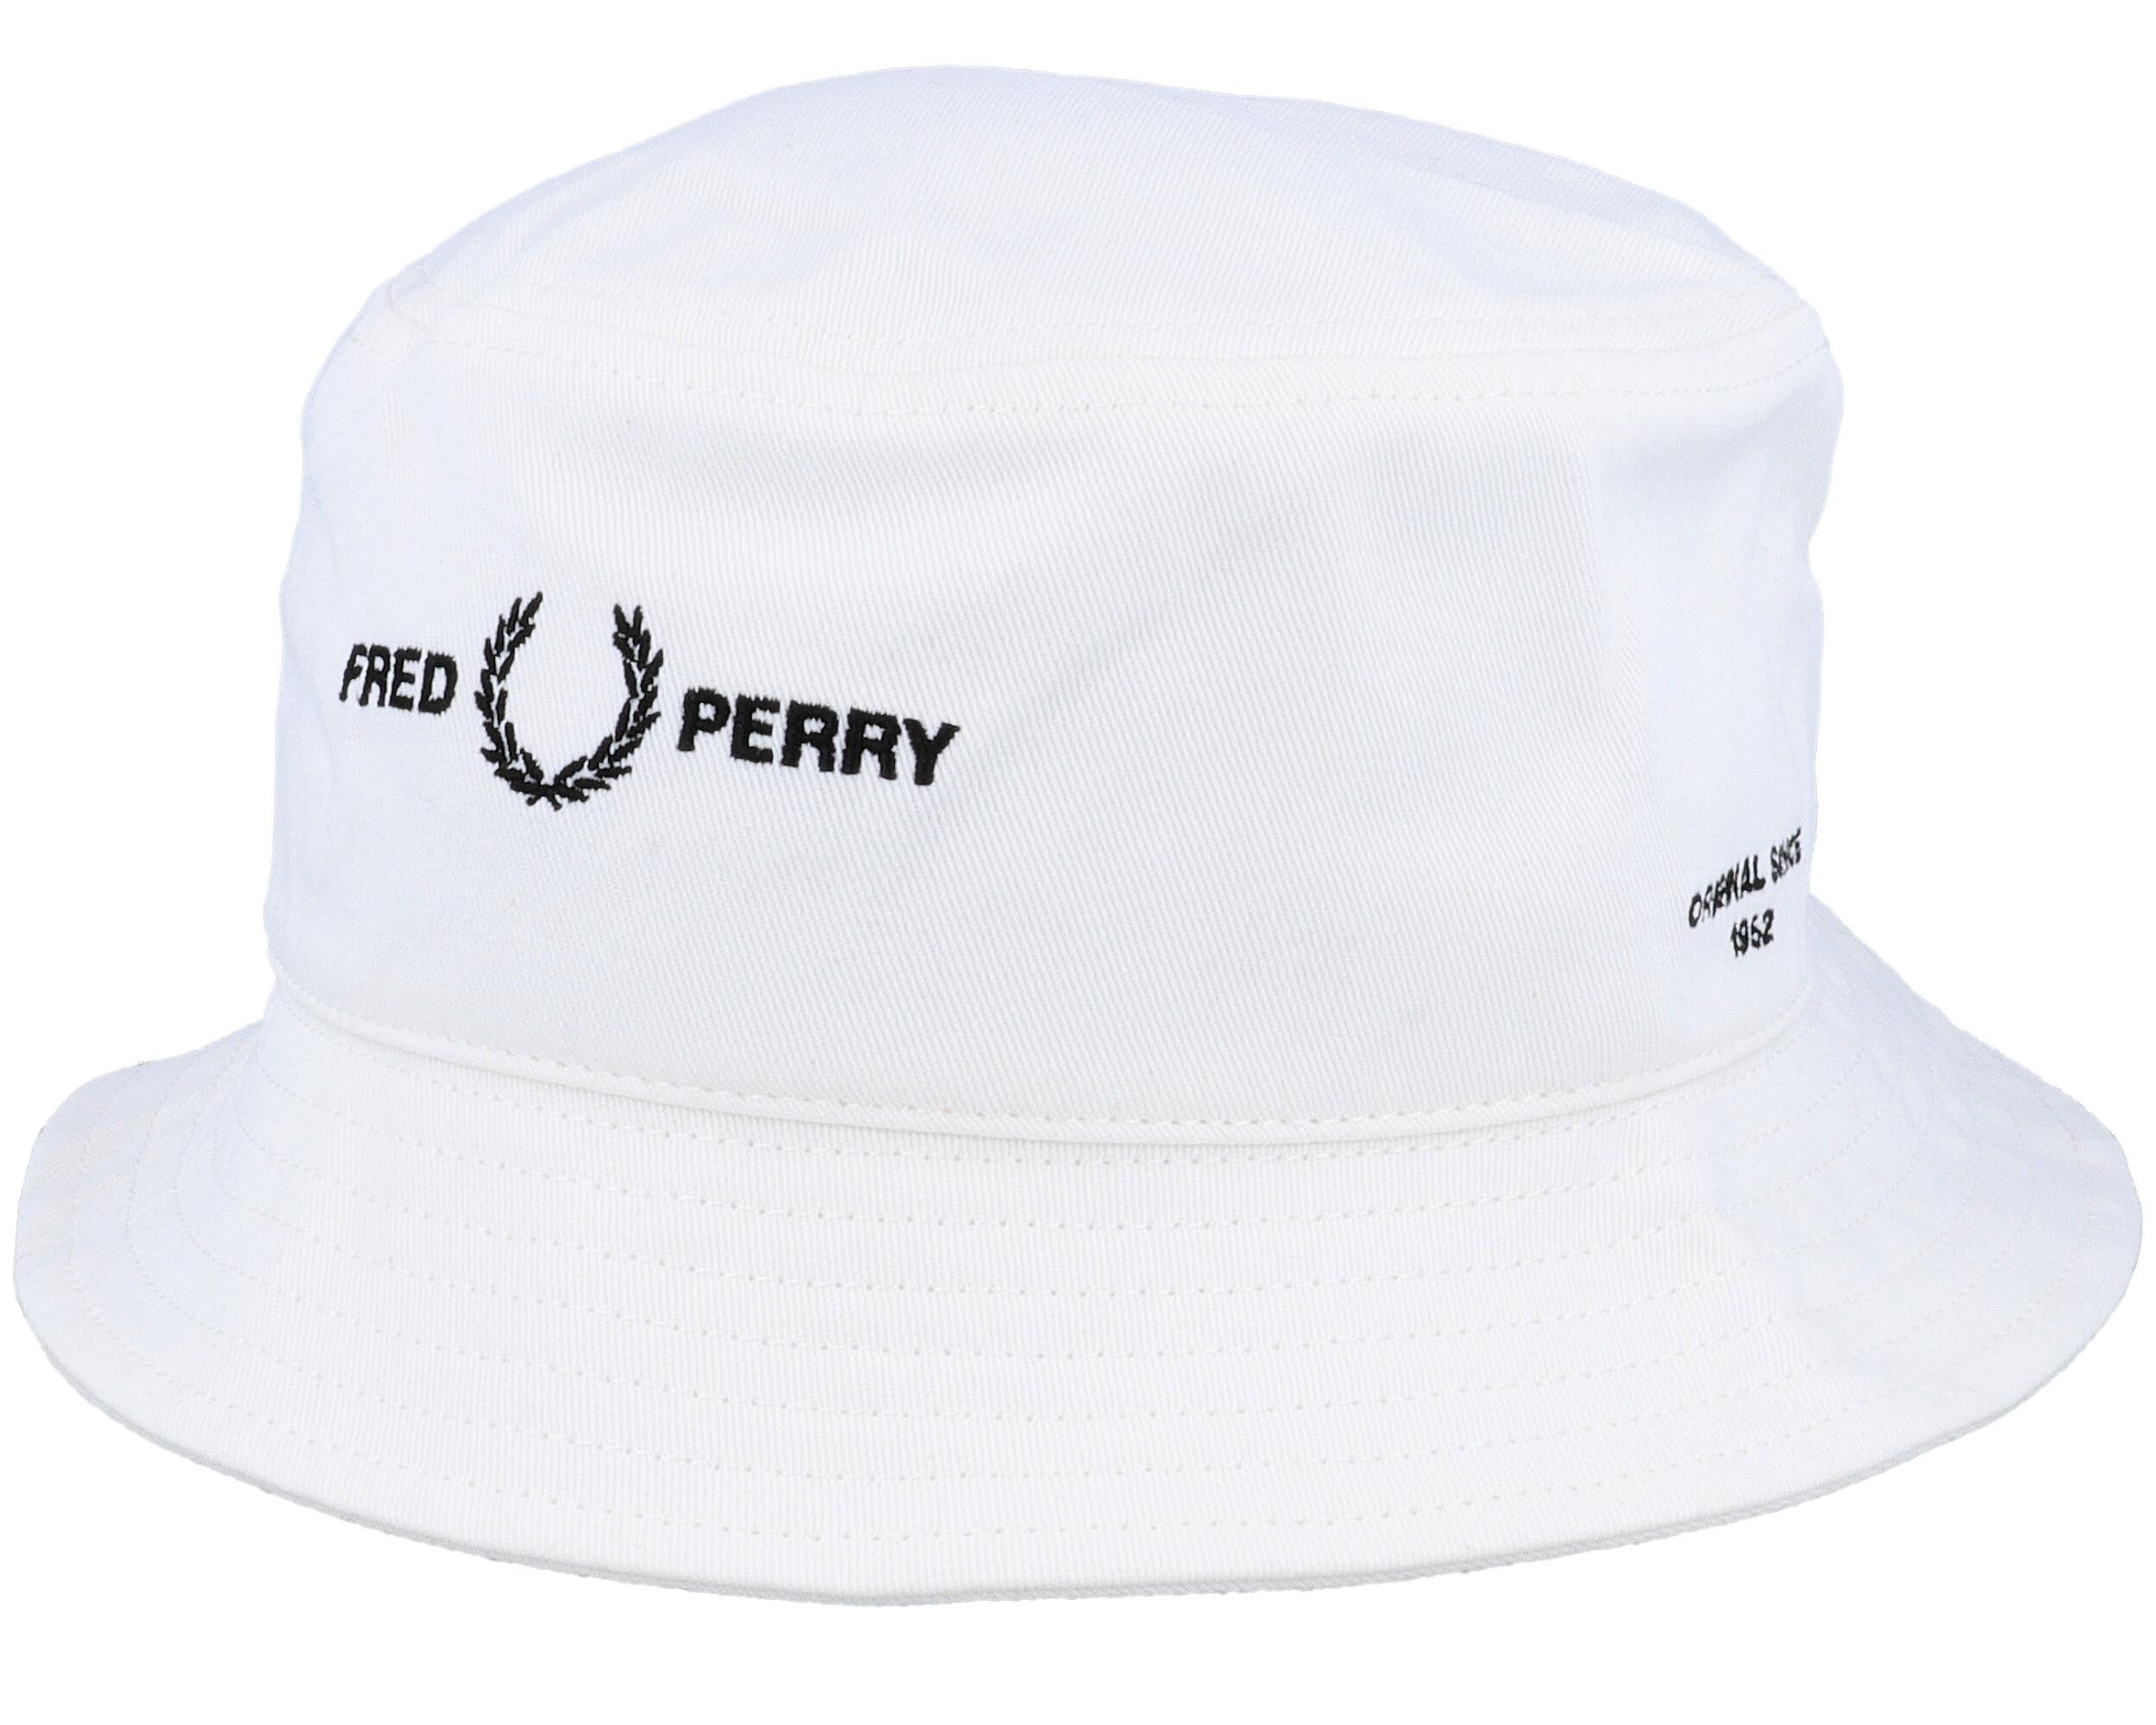 Branded Twill B Hat Snow White Bucket - Fred Perry topi, | Hatstore.com